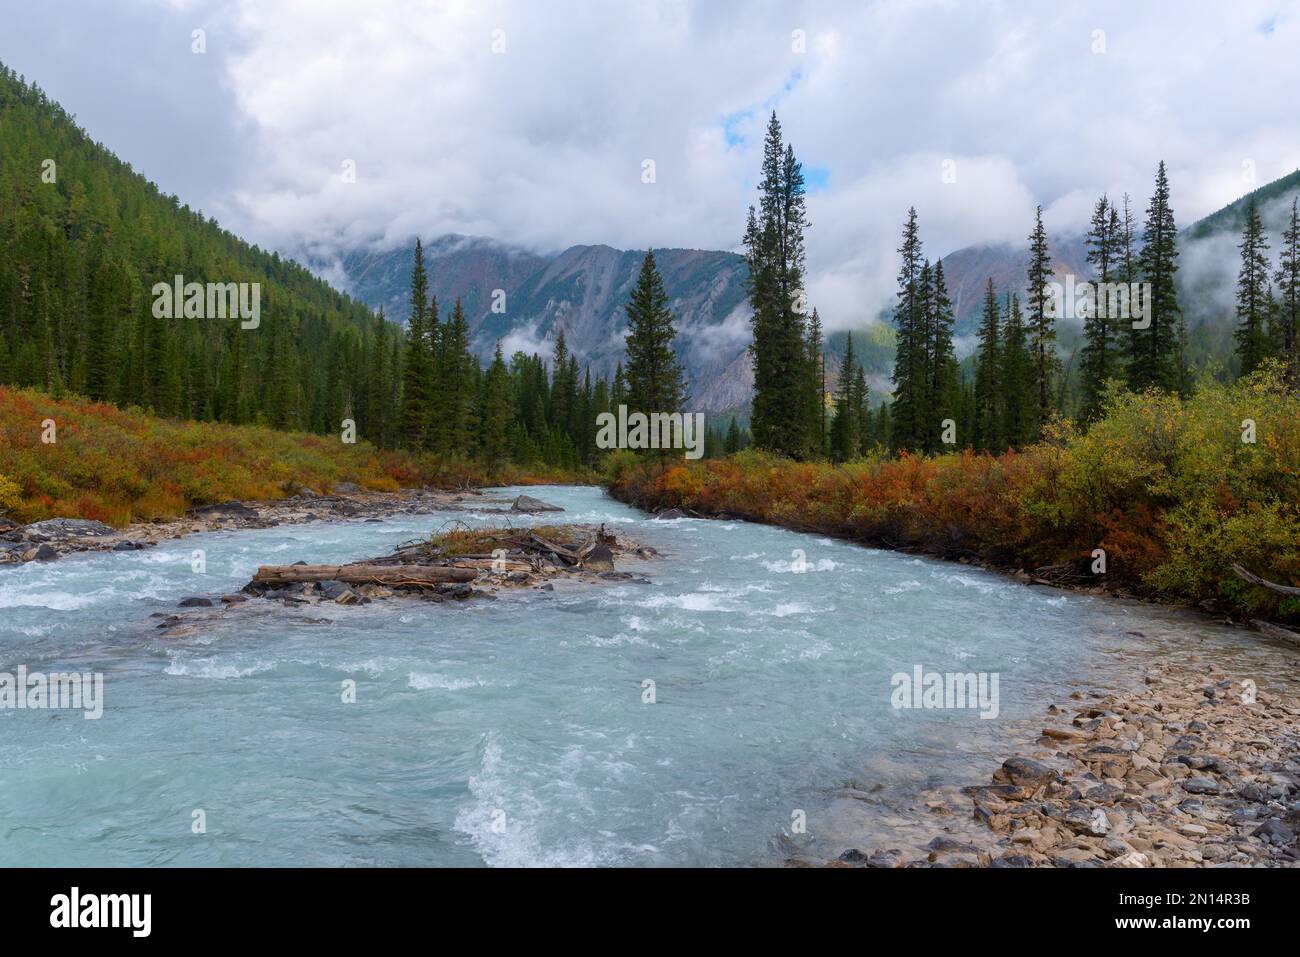 The alpine river Shavla with a small stone island in the middle flows in the mountains with spruce forest and fog after rain. Stock Photo